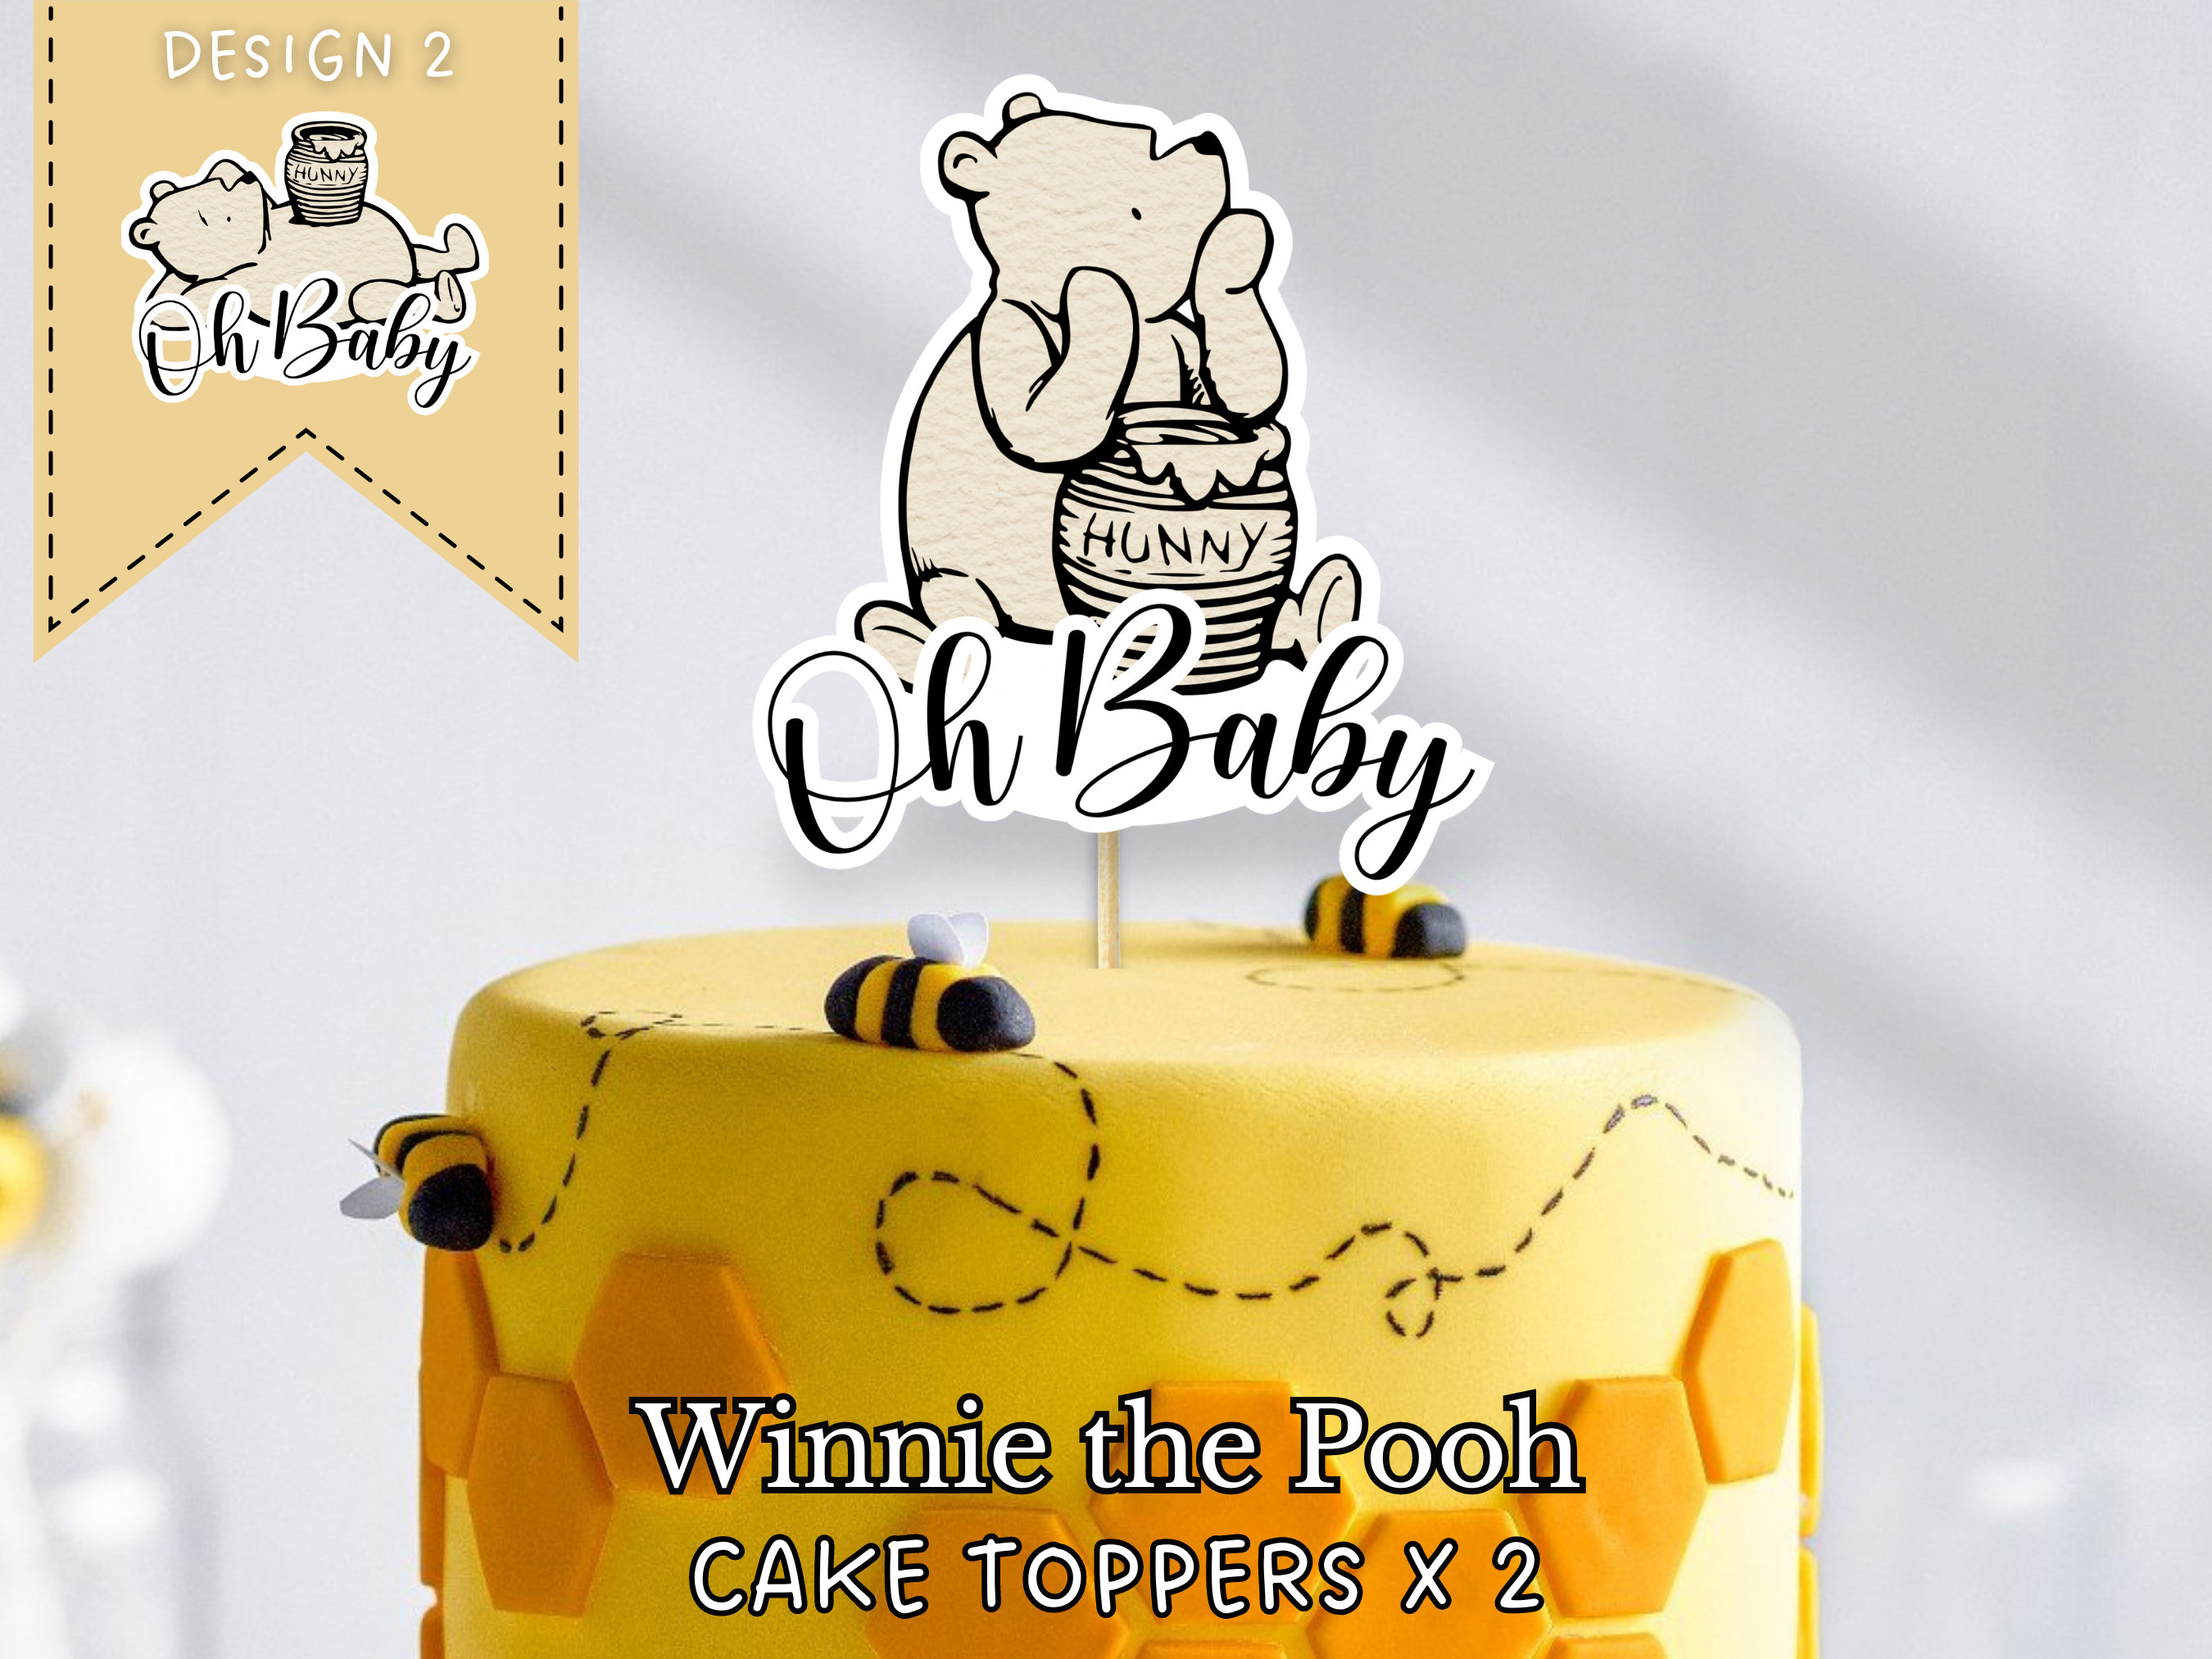 Roo cake topper Whinnie the Pooh cake topper  Winnie the pooh cake, Roo  winnie the pooh, Custom cake toppers